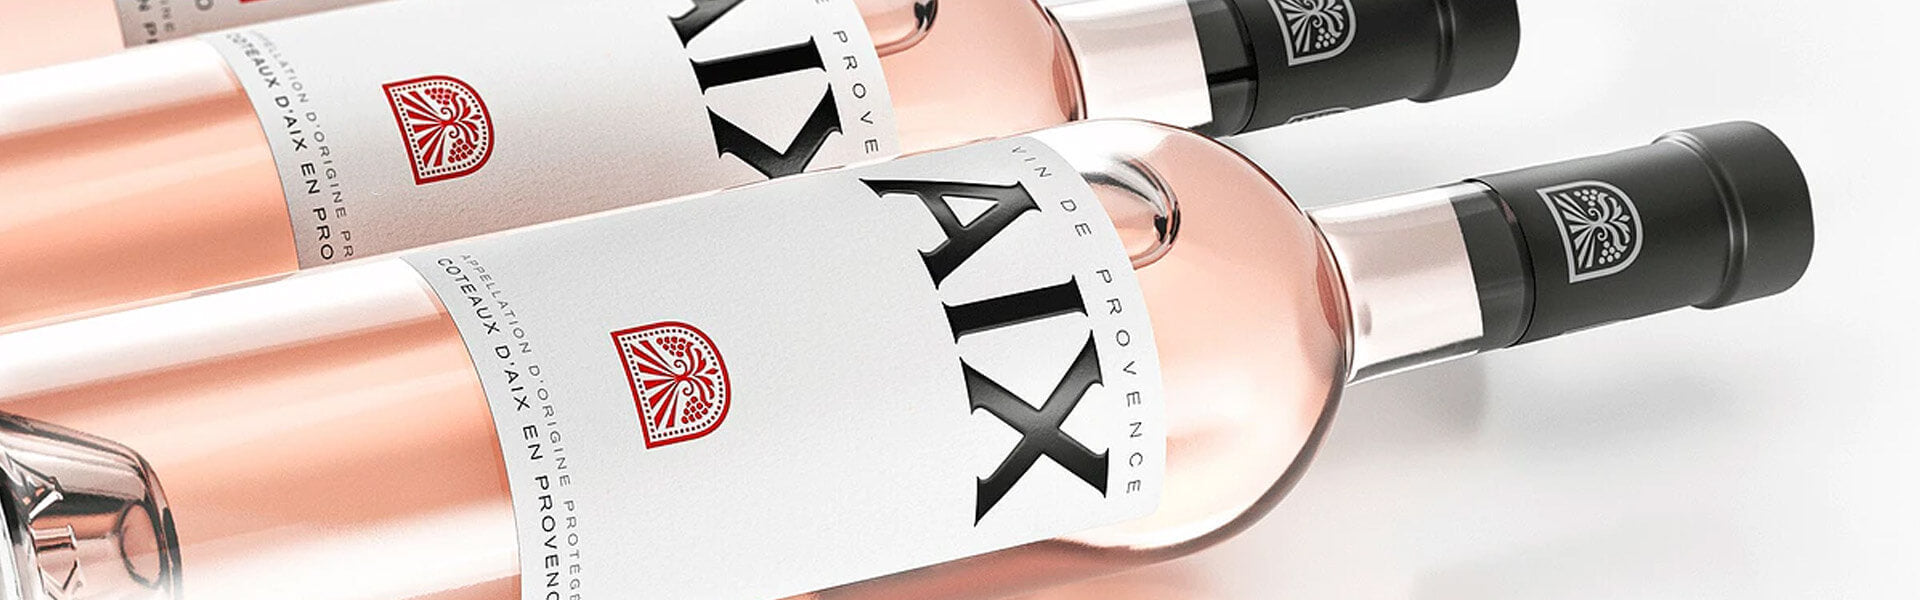 Find out more about AIX Rosé vin de Provence online at Wine Sellers Direct - Australia's independent liquor specialists.